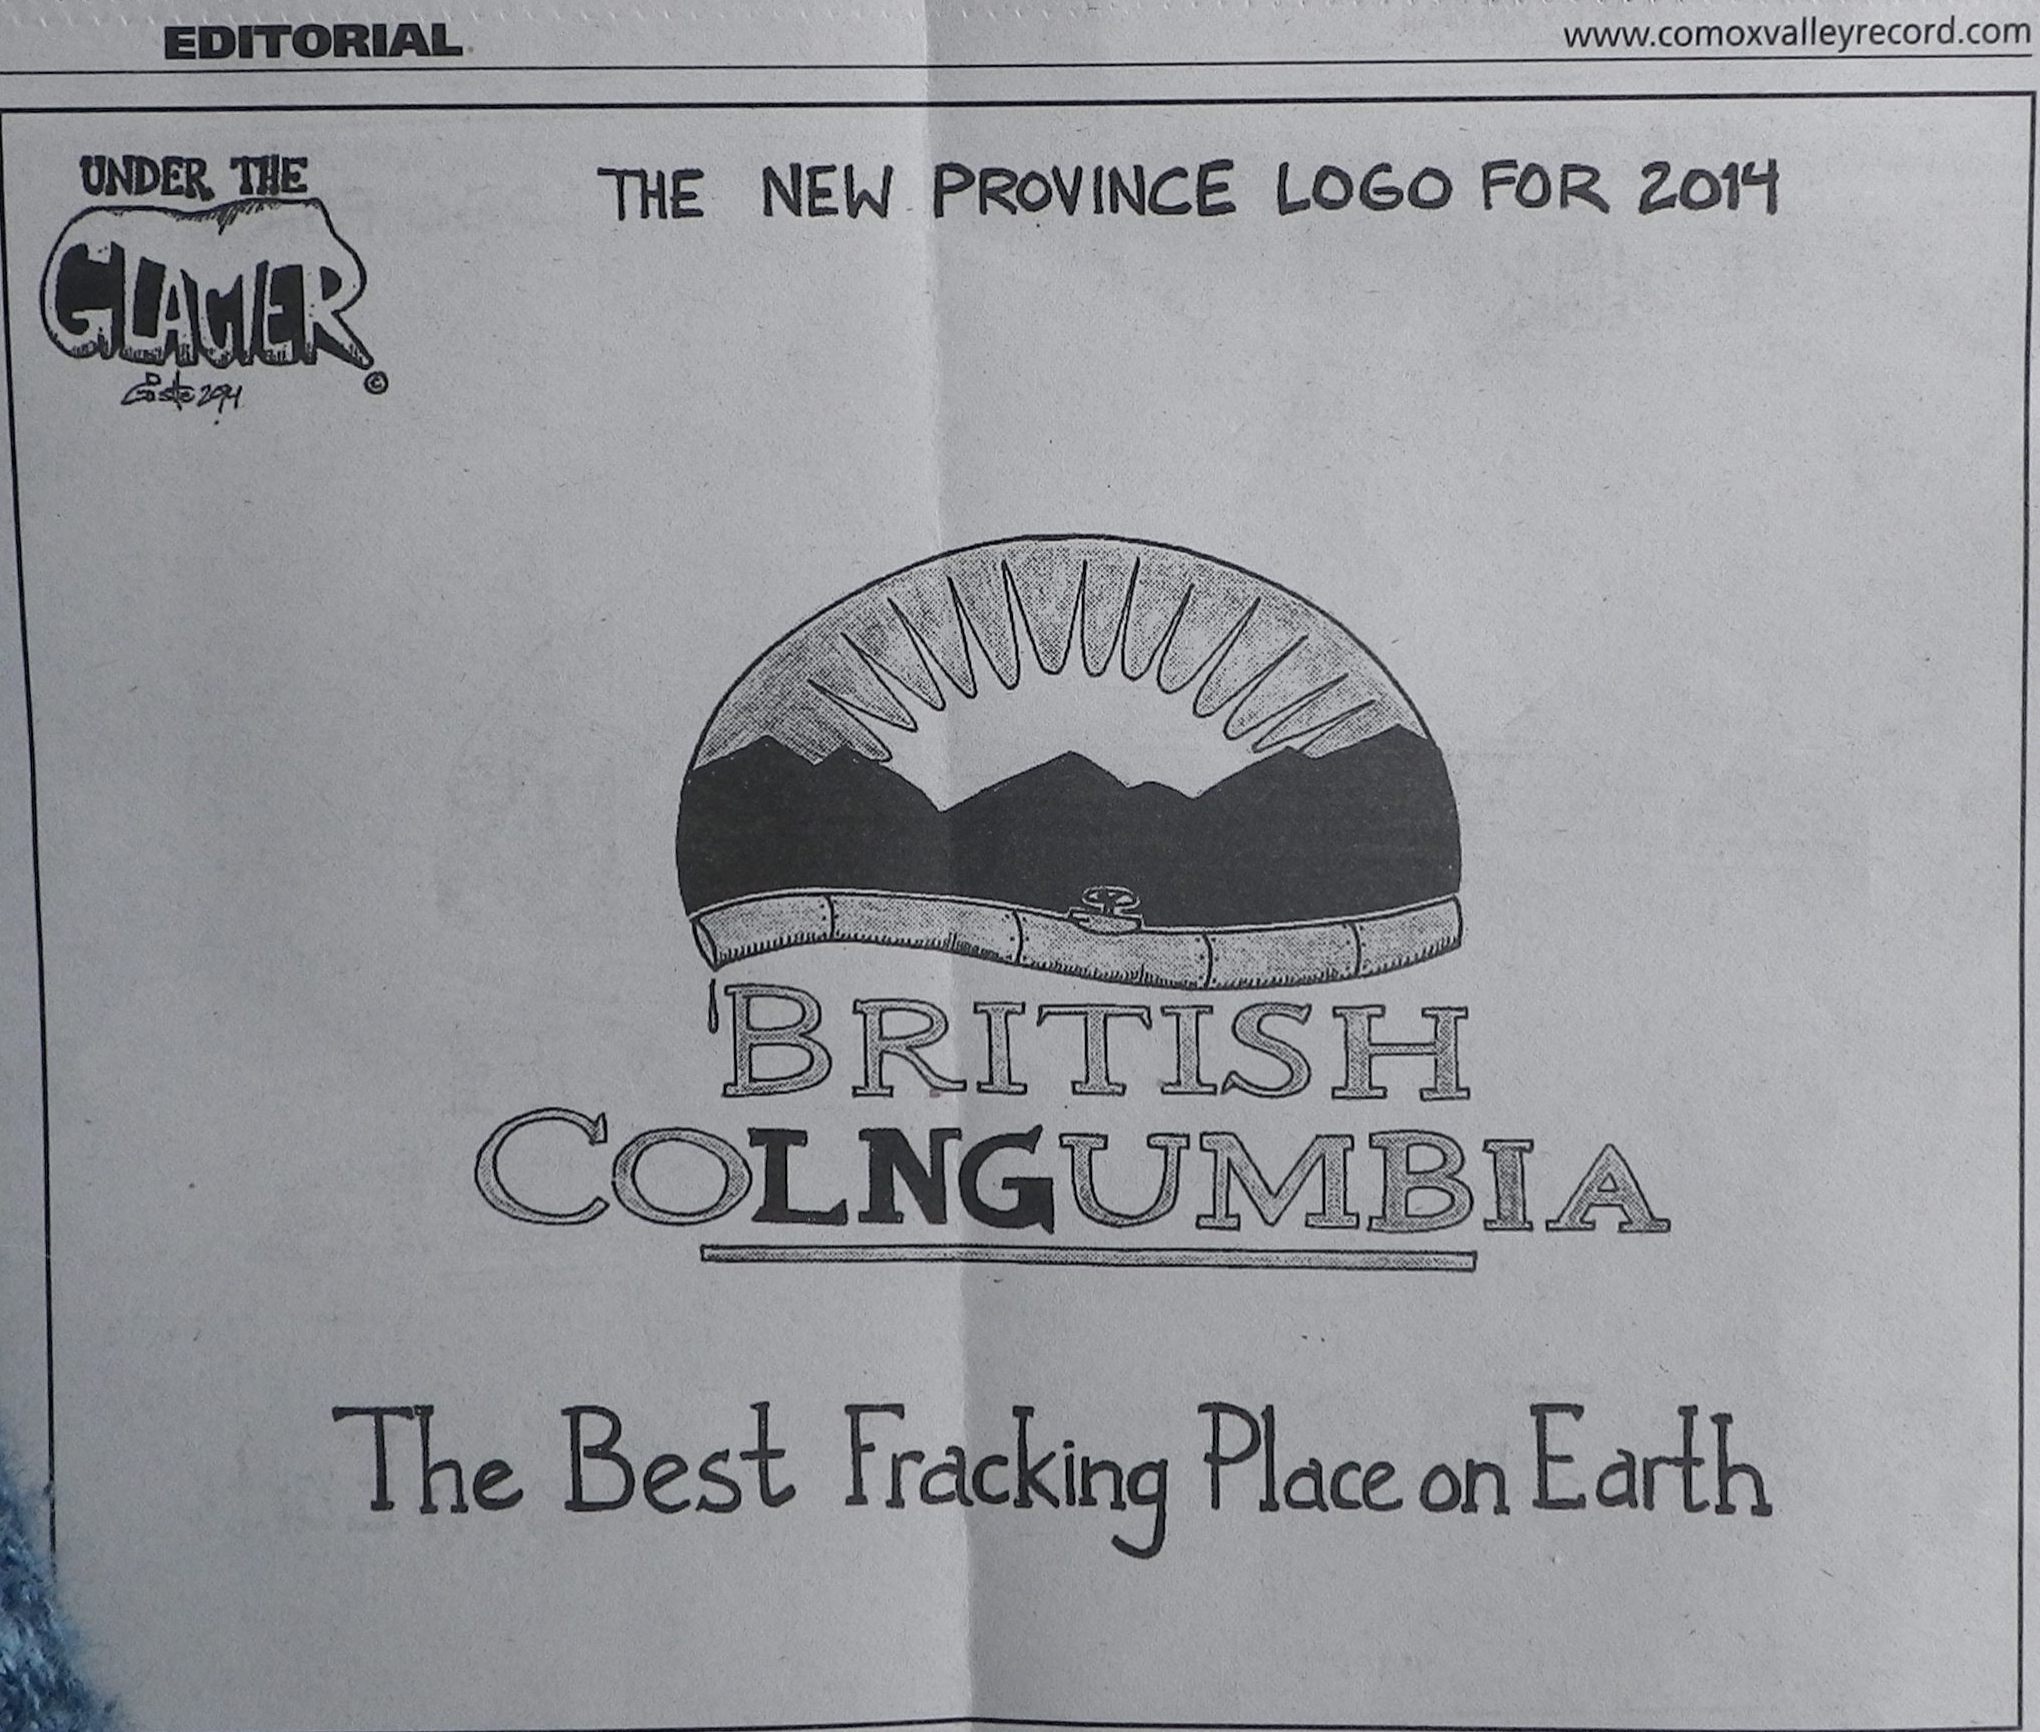 2014 02 27 BC The Best Fracking Place on Earth British Colngumbia cartoon comox valley record